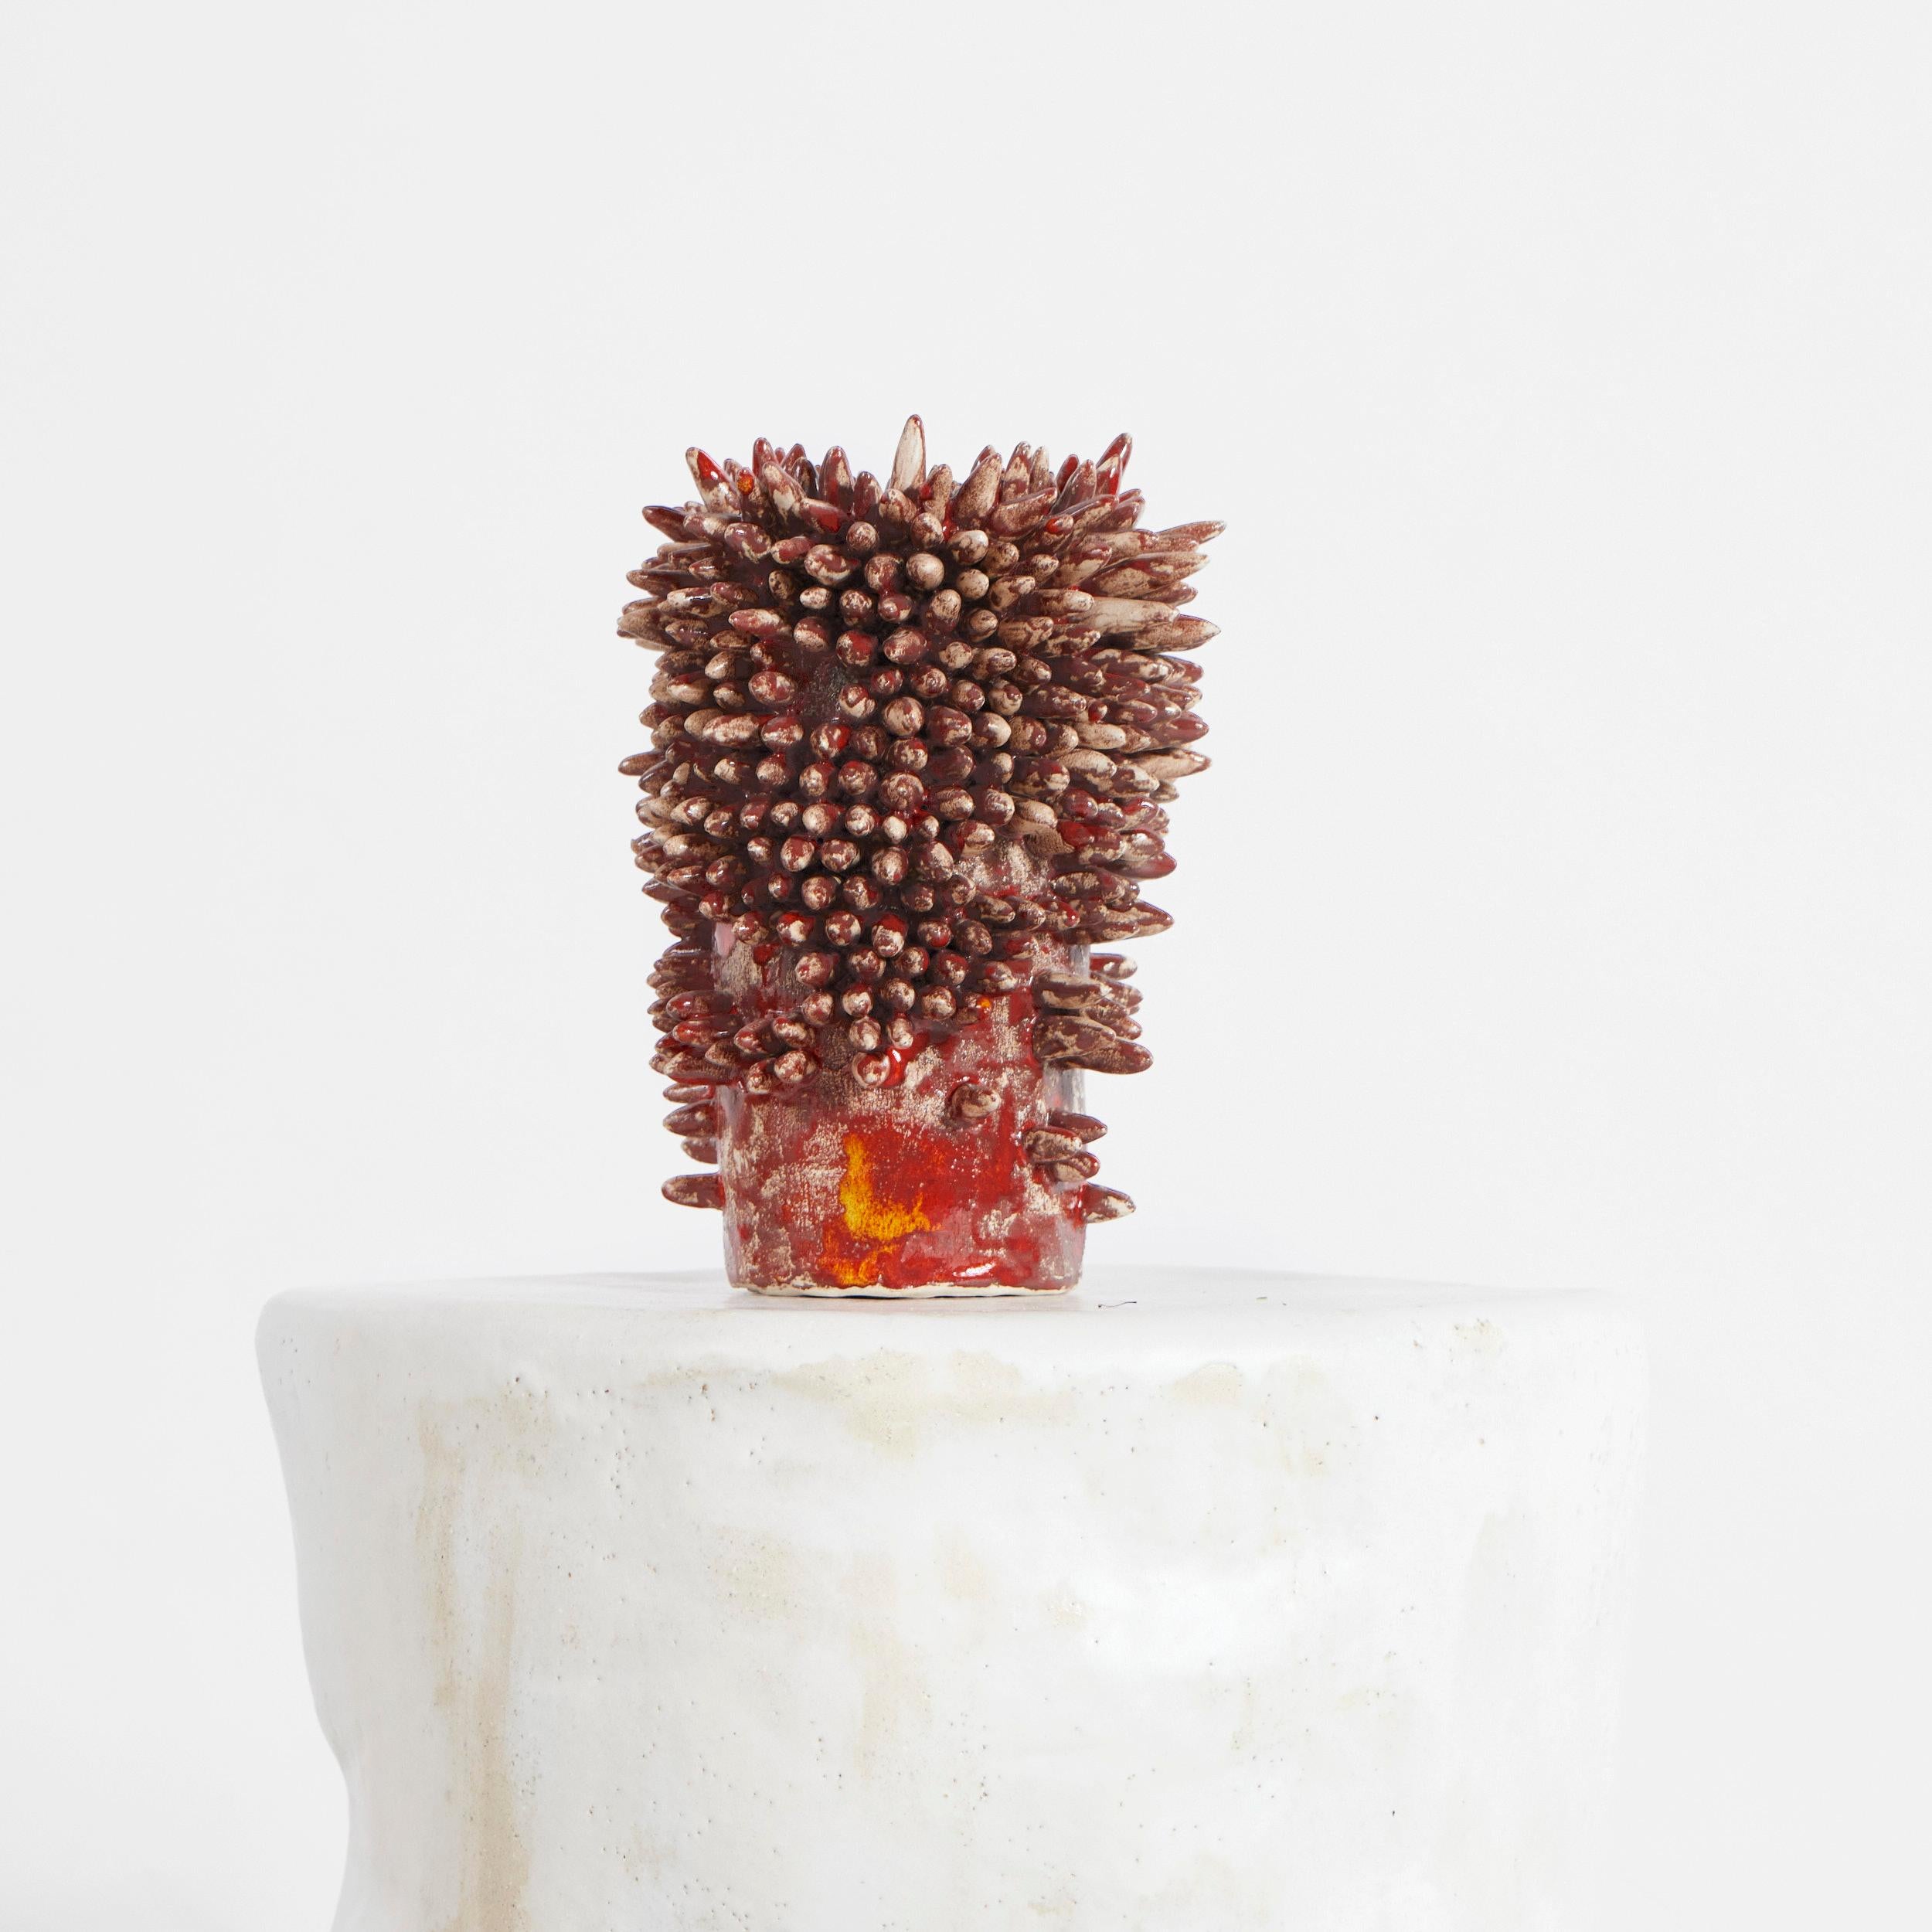 Appuntito Vase by Project 213A
Dimensions: W17 x D17 x H26 cm
Materials: Ceramic

Each its own individual, the touch of hand from the ceramists, the blaze from the kiln, the dive in the glaze. The artisanal ceramics stay true to their roots.
Their